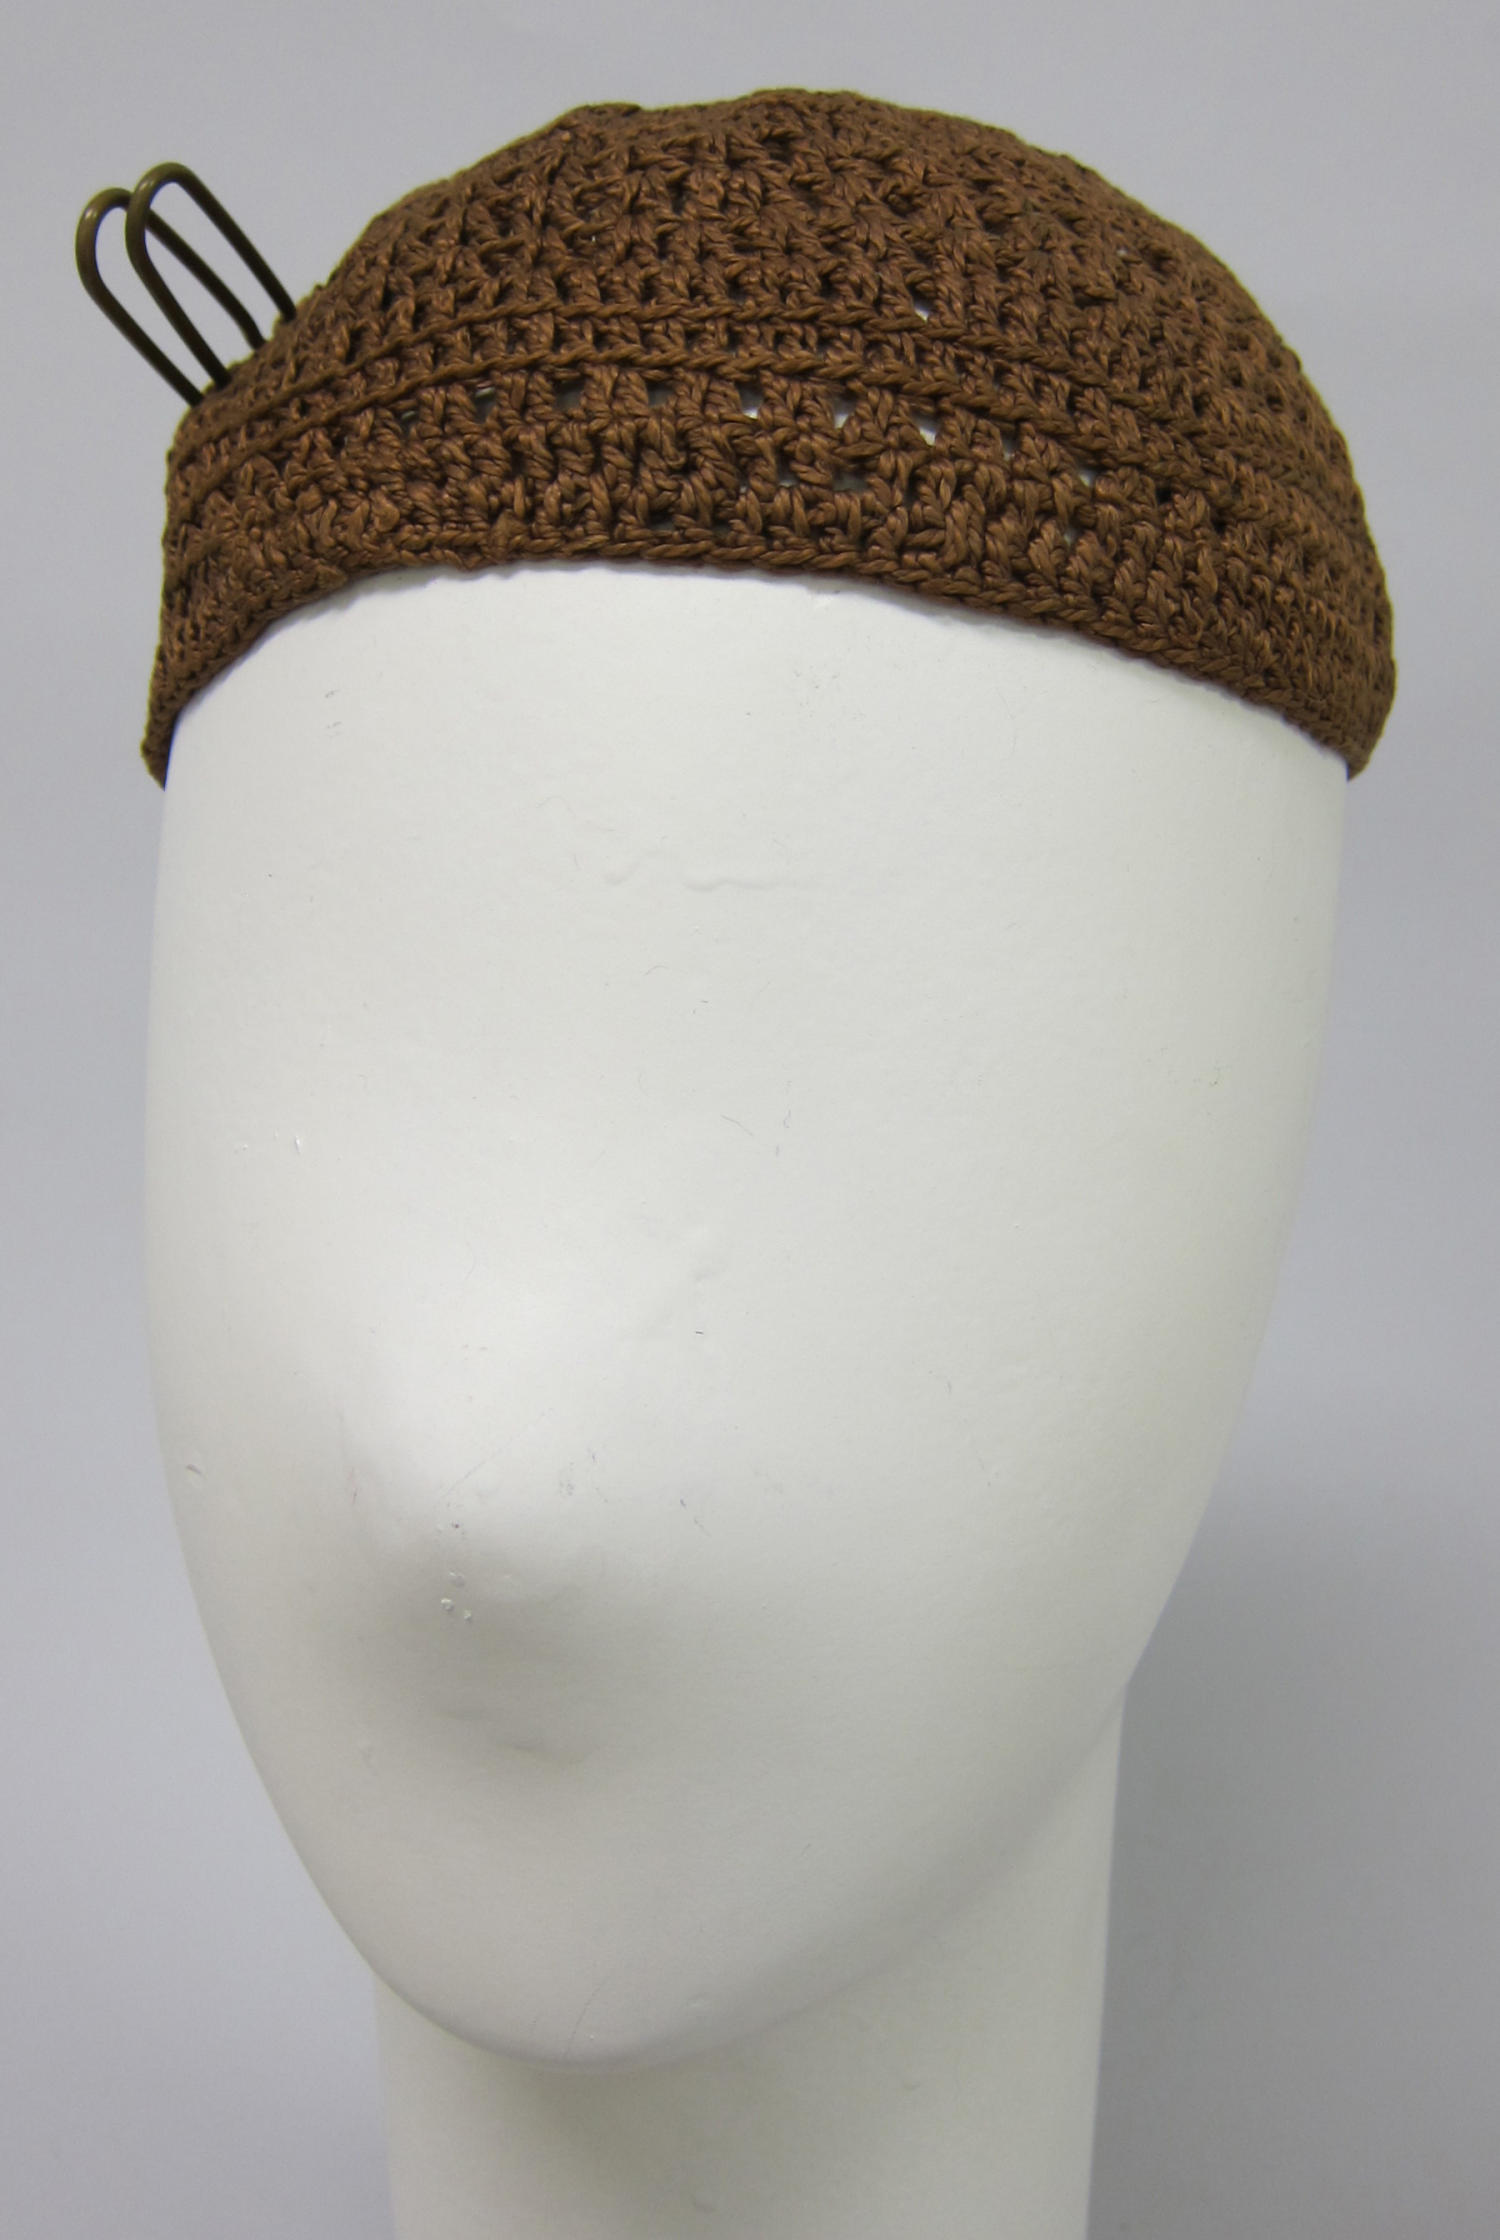 Crocheted Cap
                                                
                                                    [Sequence #]: 2 of 7
                                                